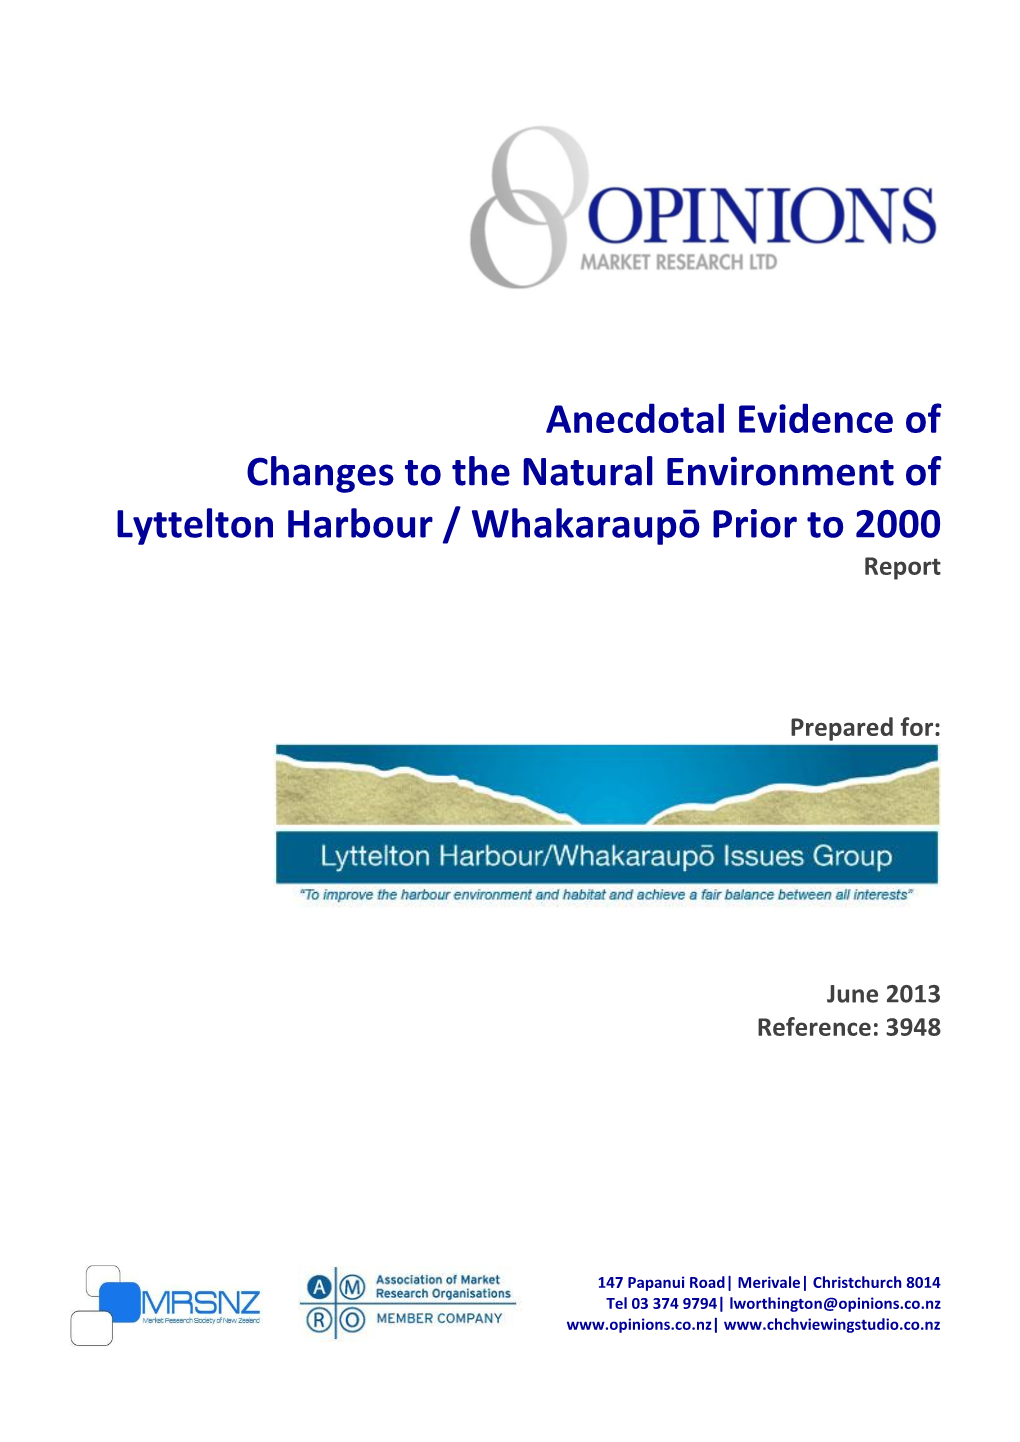 Anecdotal Evidence of Changes to the Natural Environment of Lyttelton Harbour / Whakaraupō Prior to 2000 Report